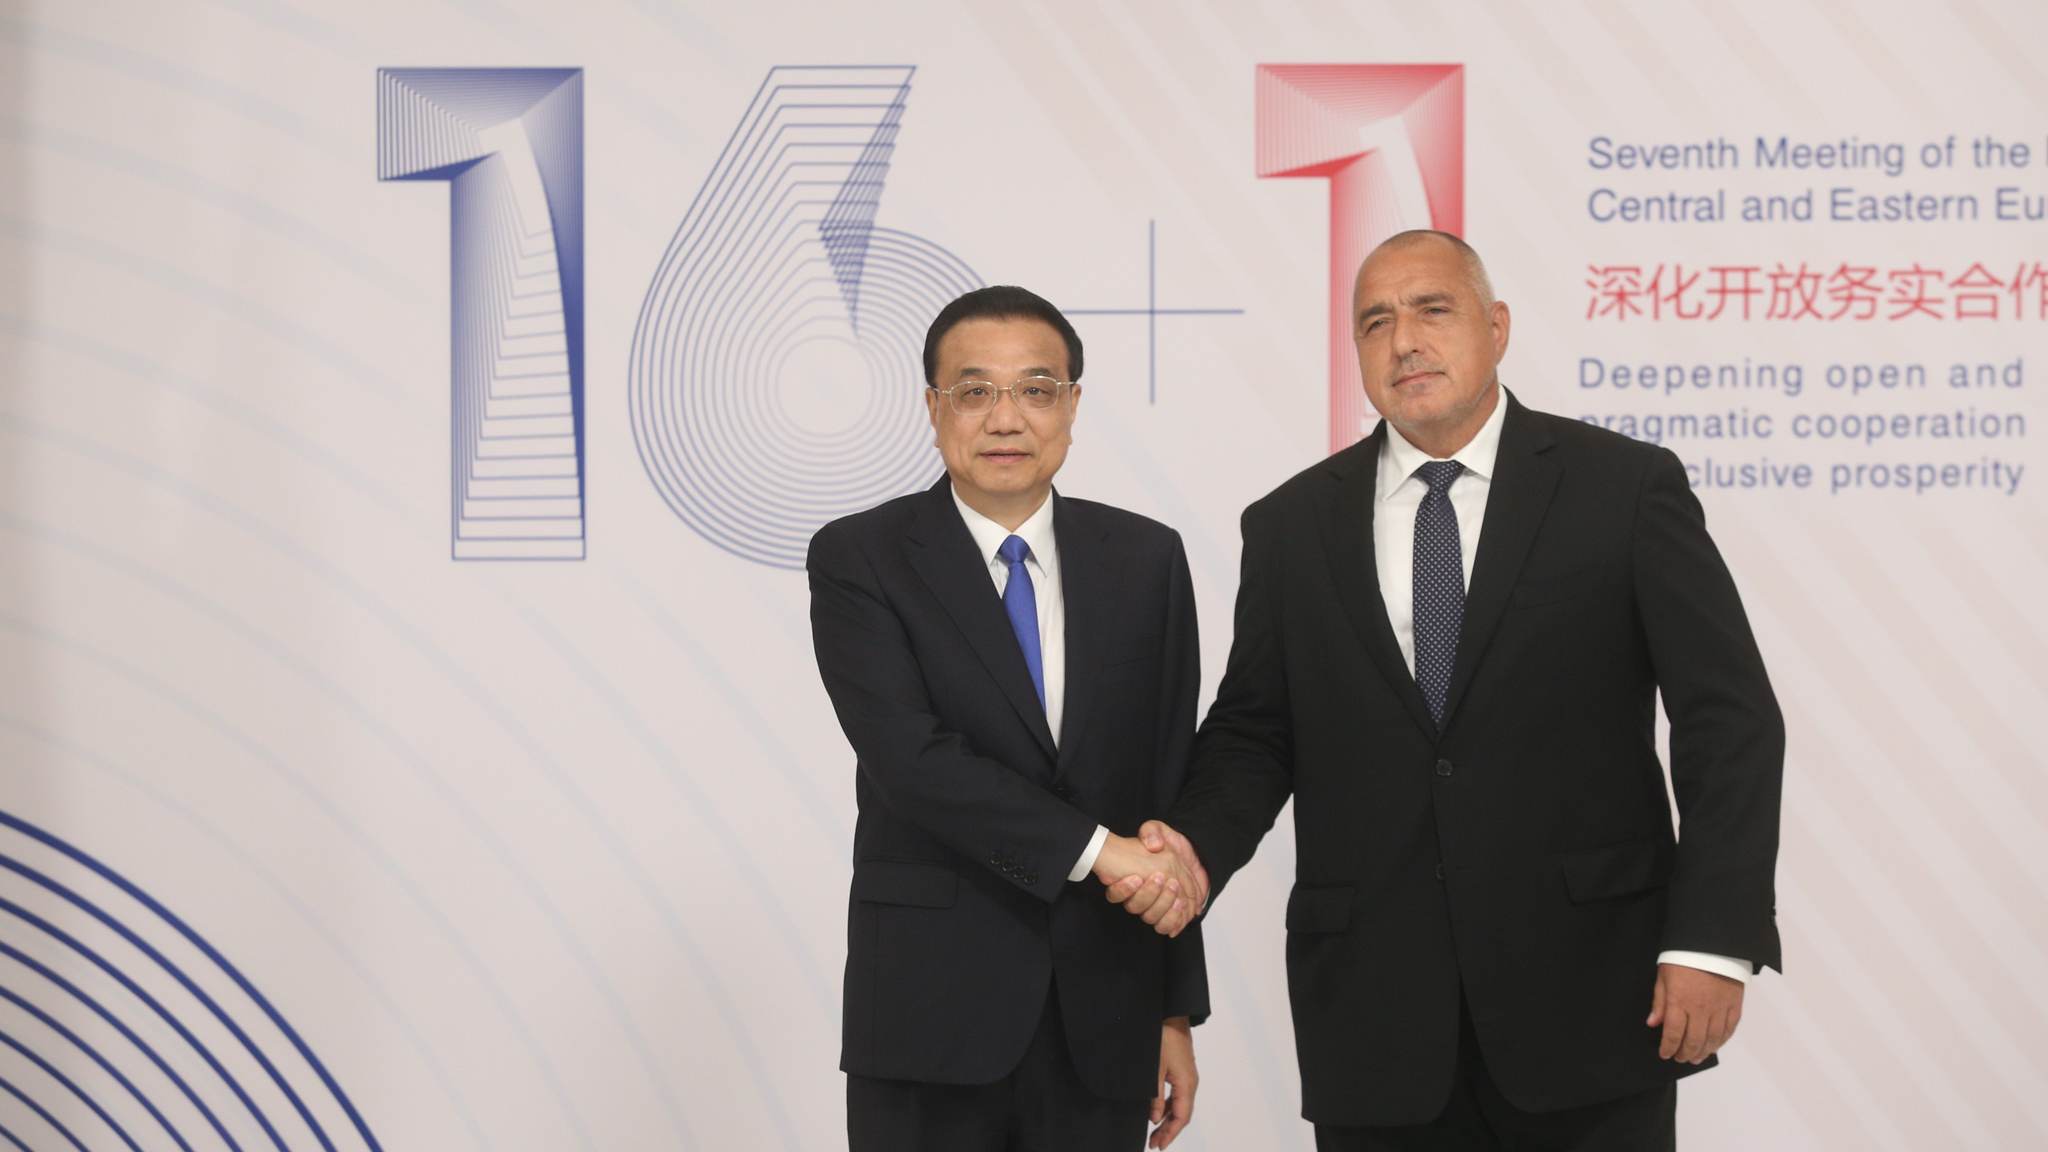 Photo: Prime Minister Boyko Borissov and the People's Republic of China's State Council of China Li Keqiang at the opening of the 2018 16+1 Summit in Sofia, Bulgaria. Credit: Council of Ministers of the Republic of Bulgaria.